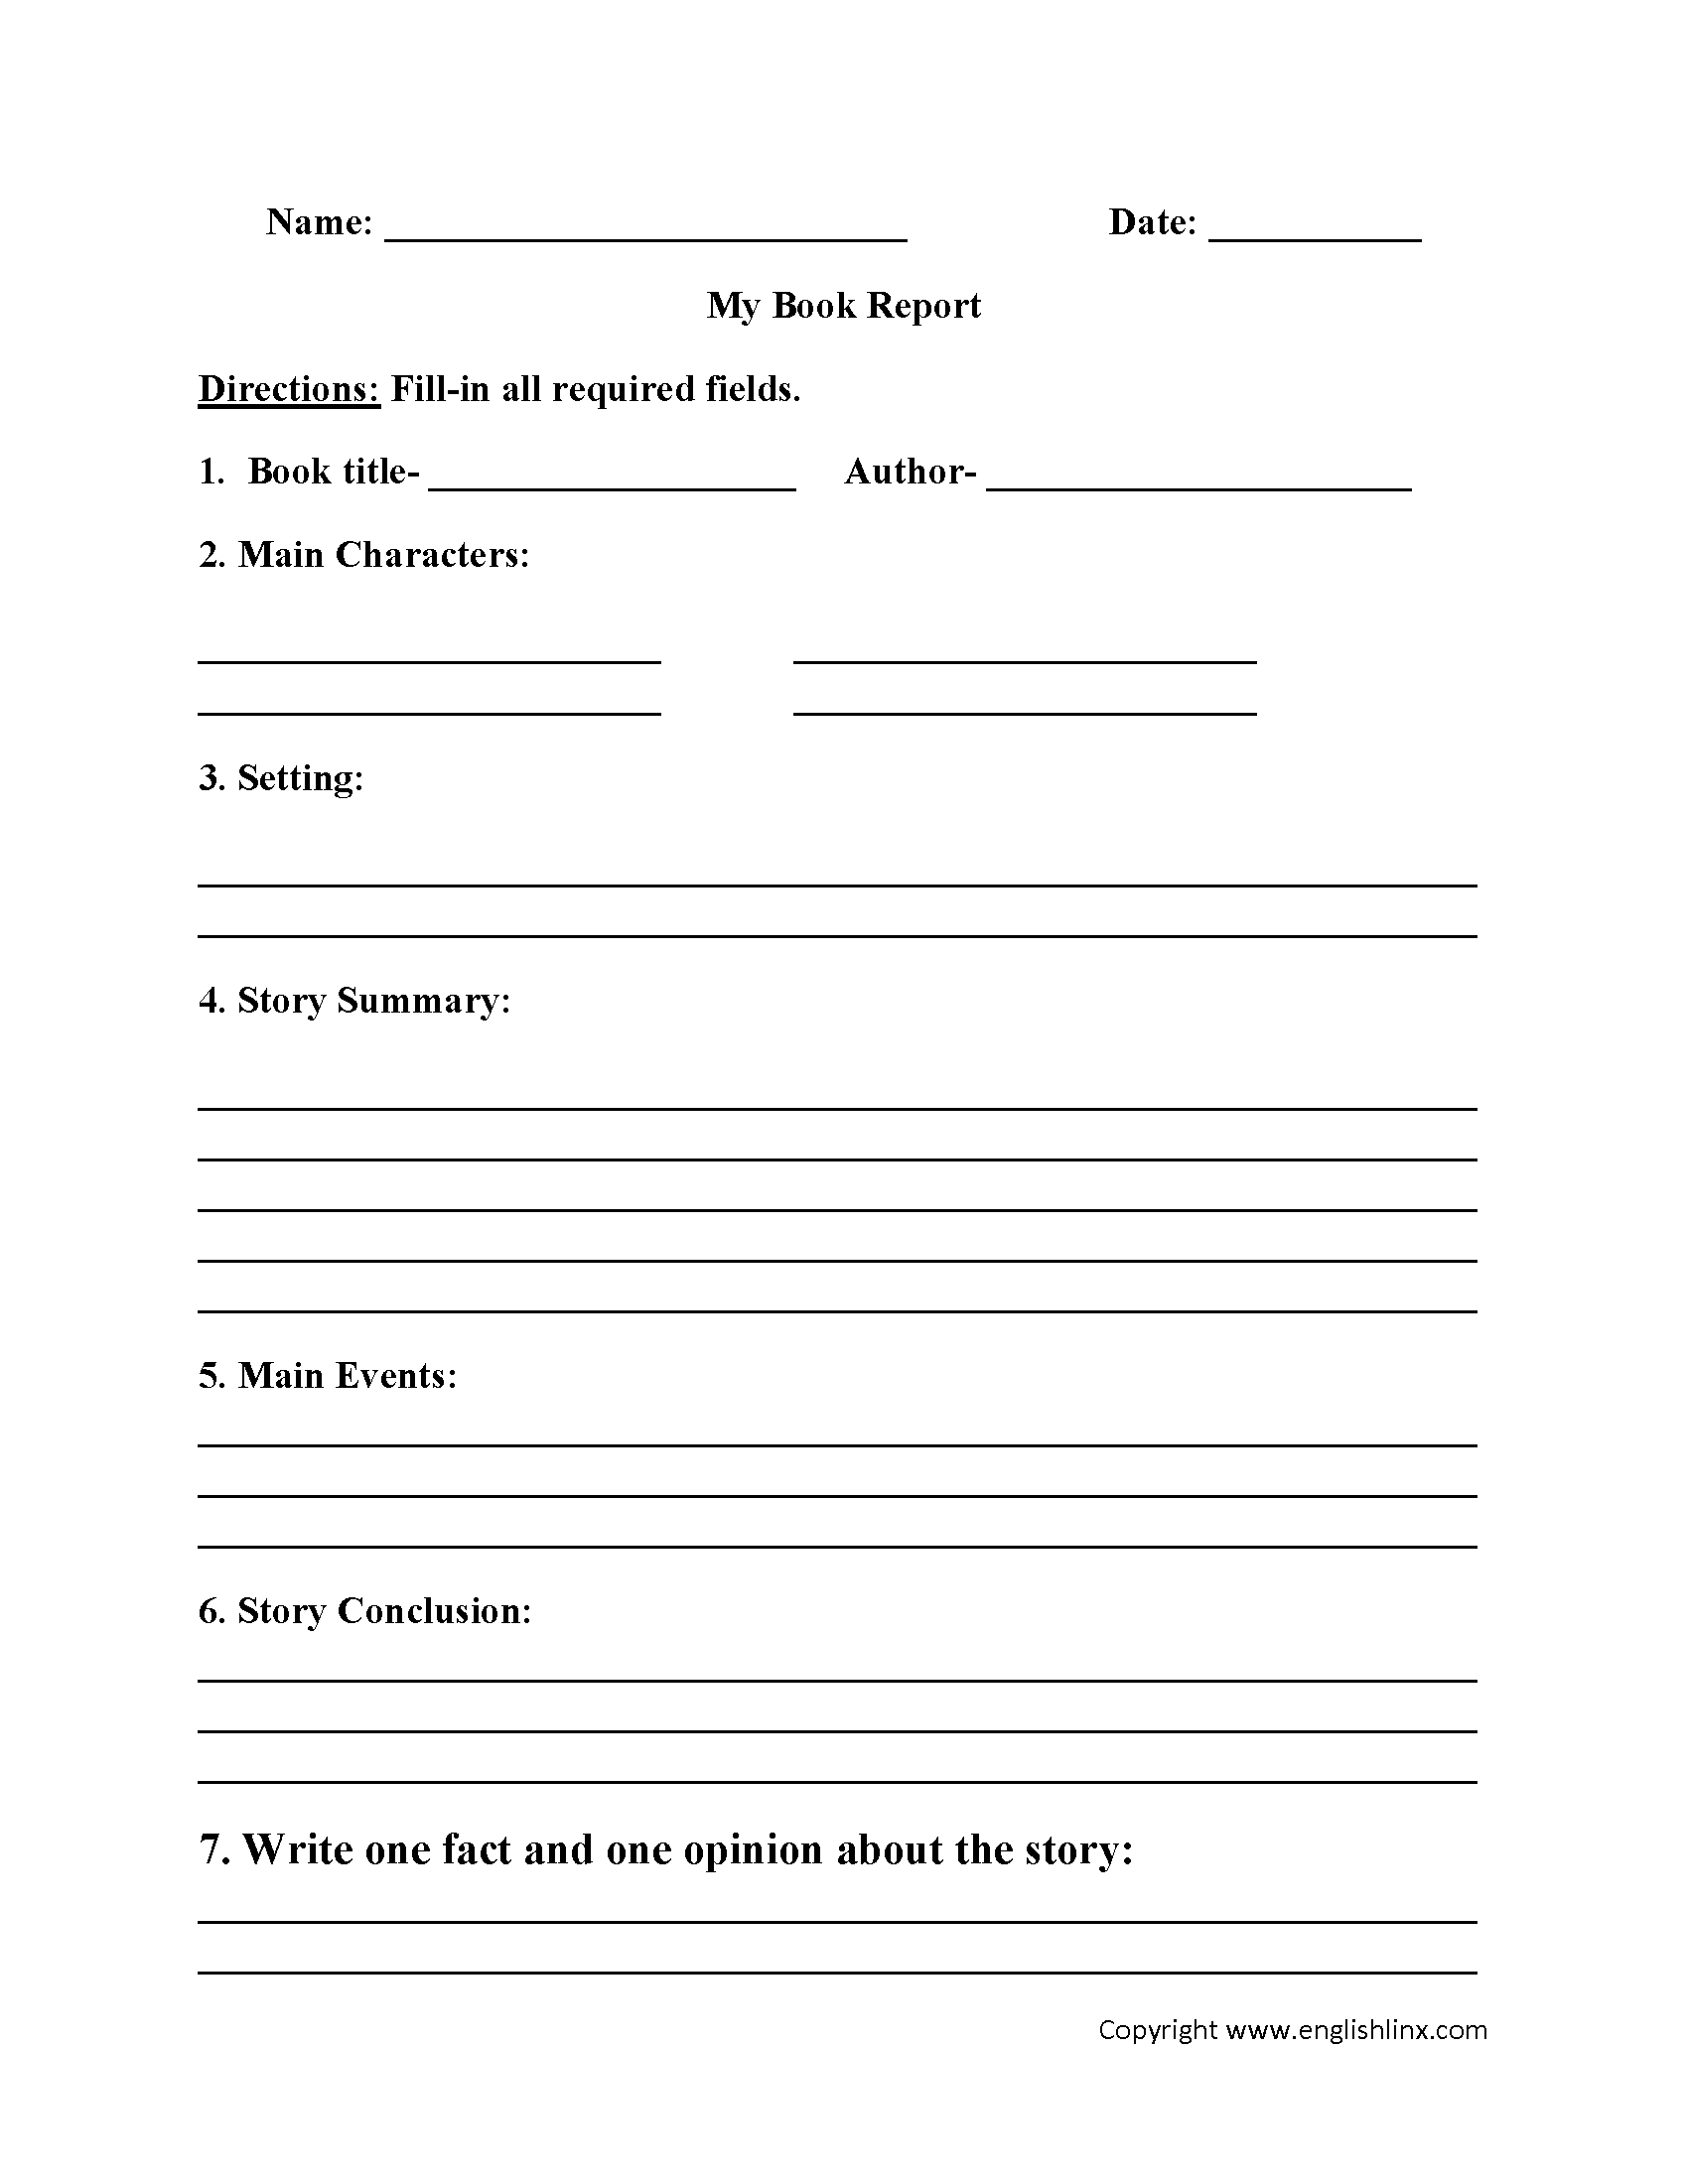 Englishlinx | Book Report Worksheets - Free Printable Book Report Forms